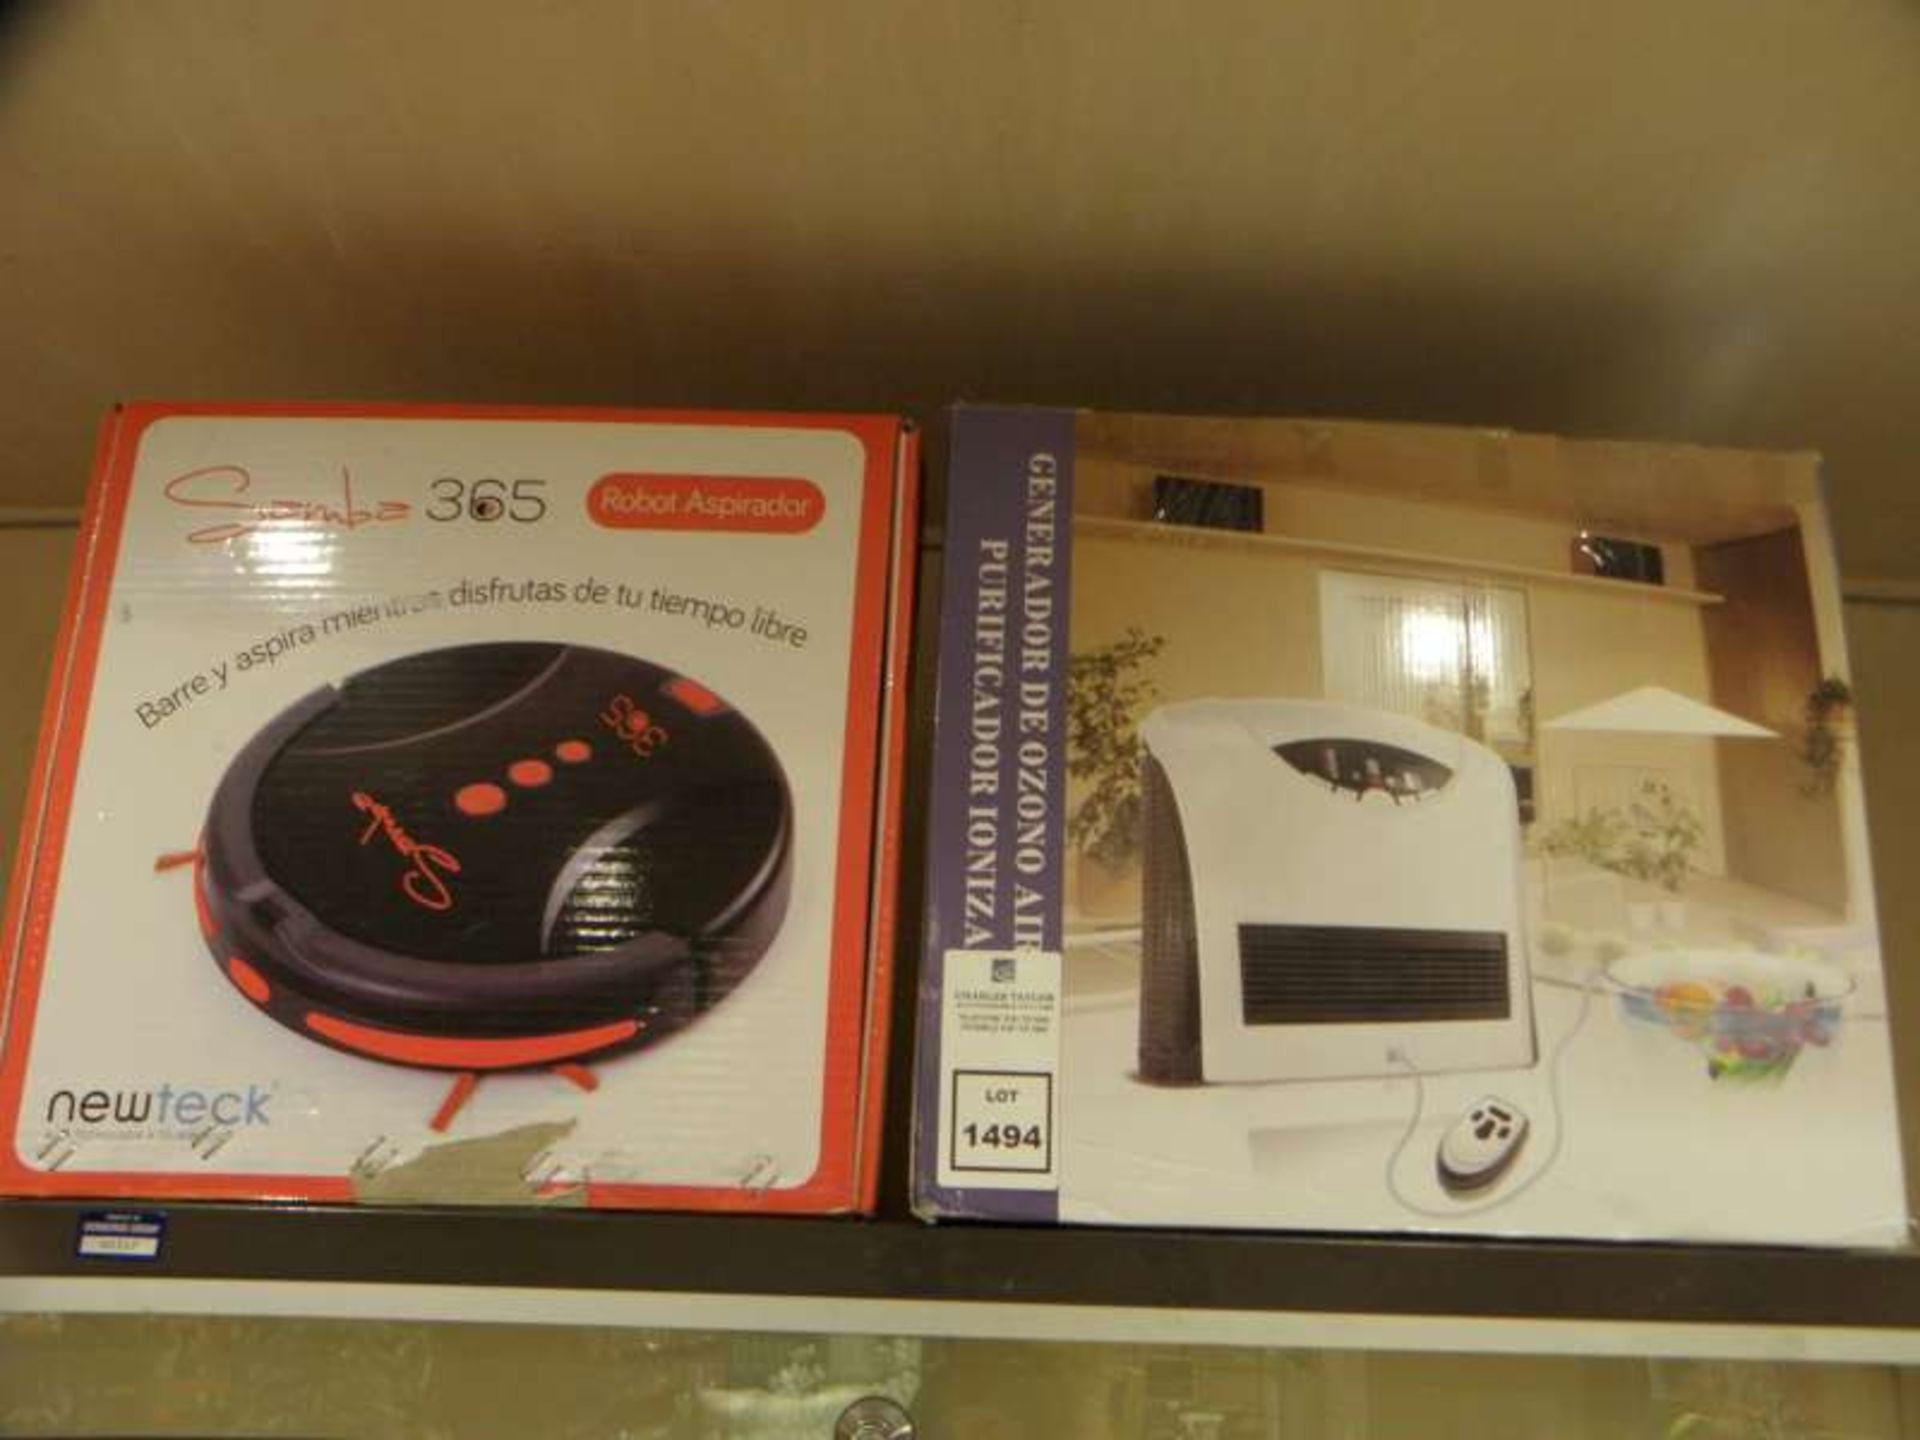 LOT CONTAINING NEWTECK ROBOT VACUUM CLEANER, AIR PURIFIER